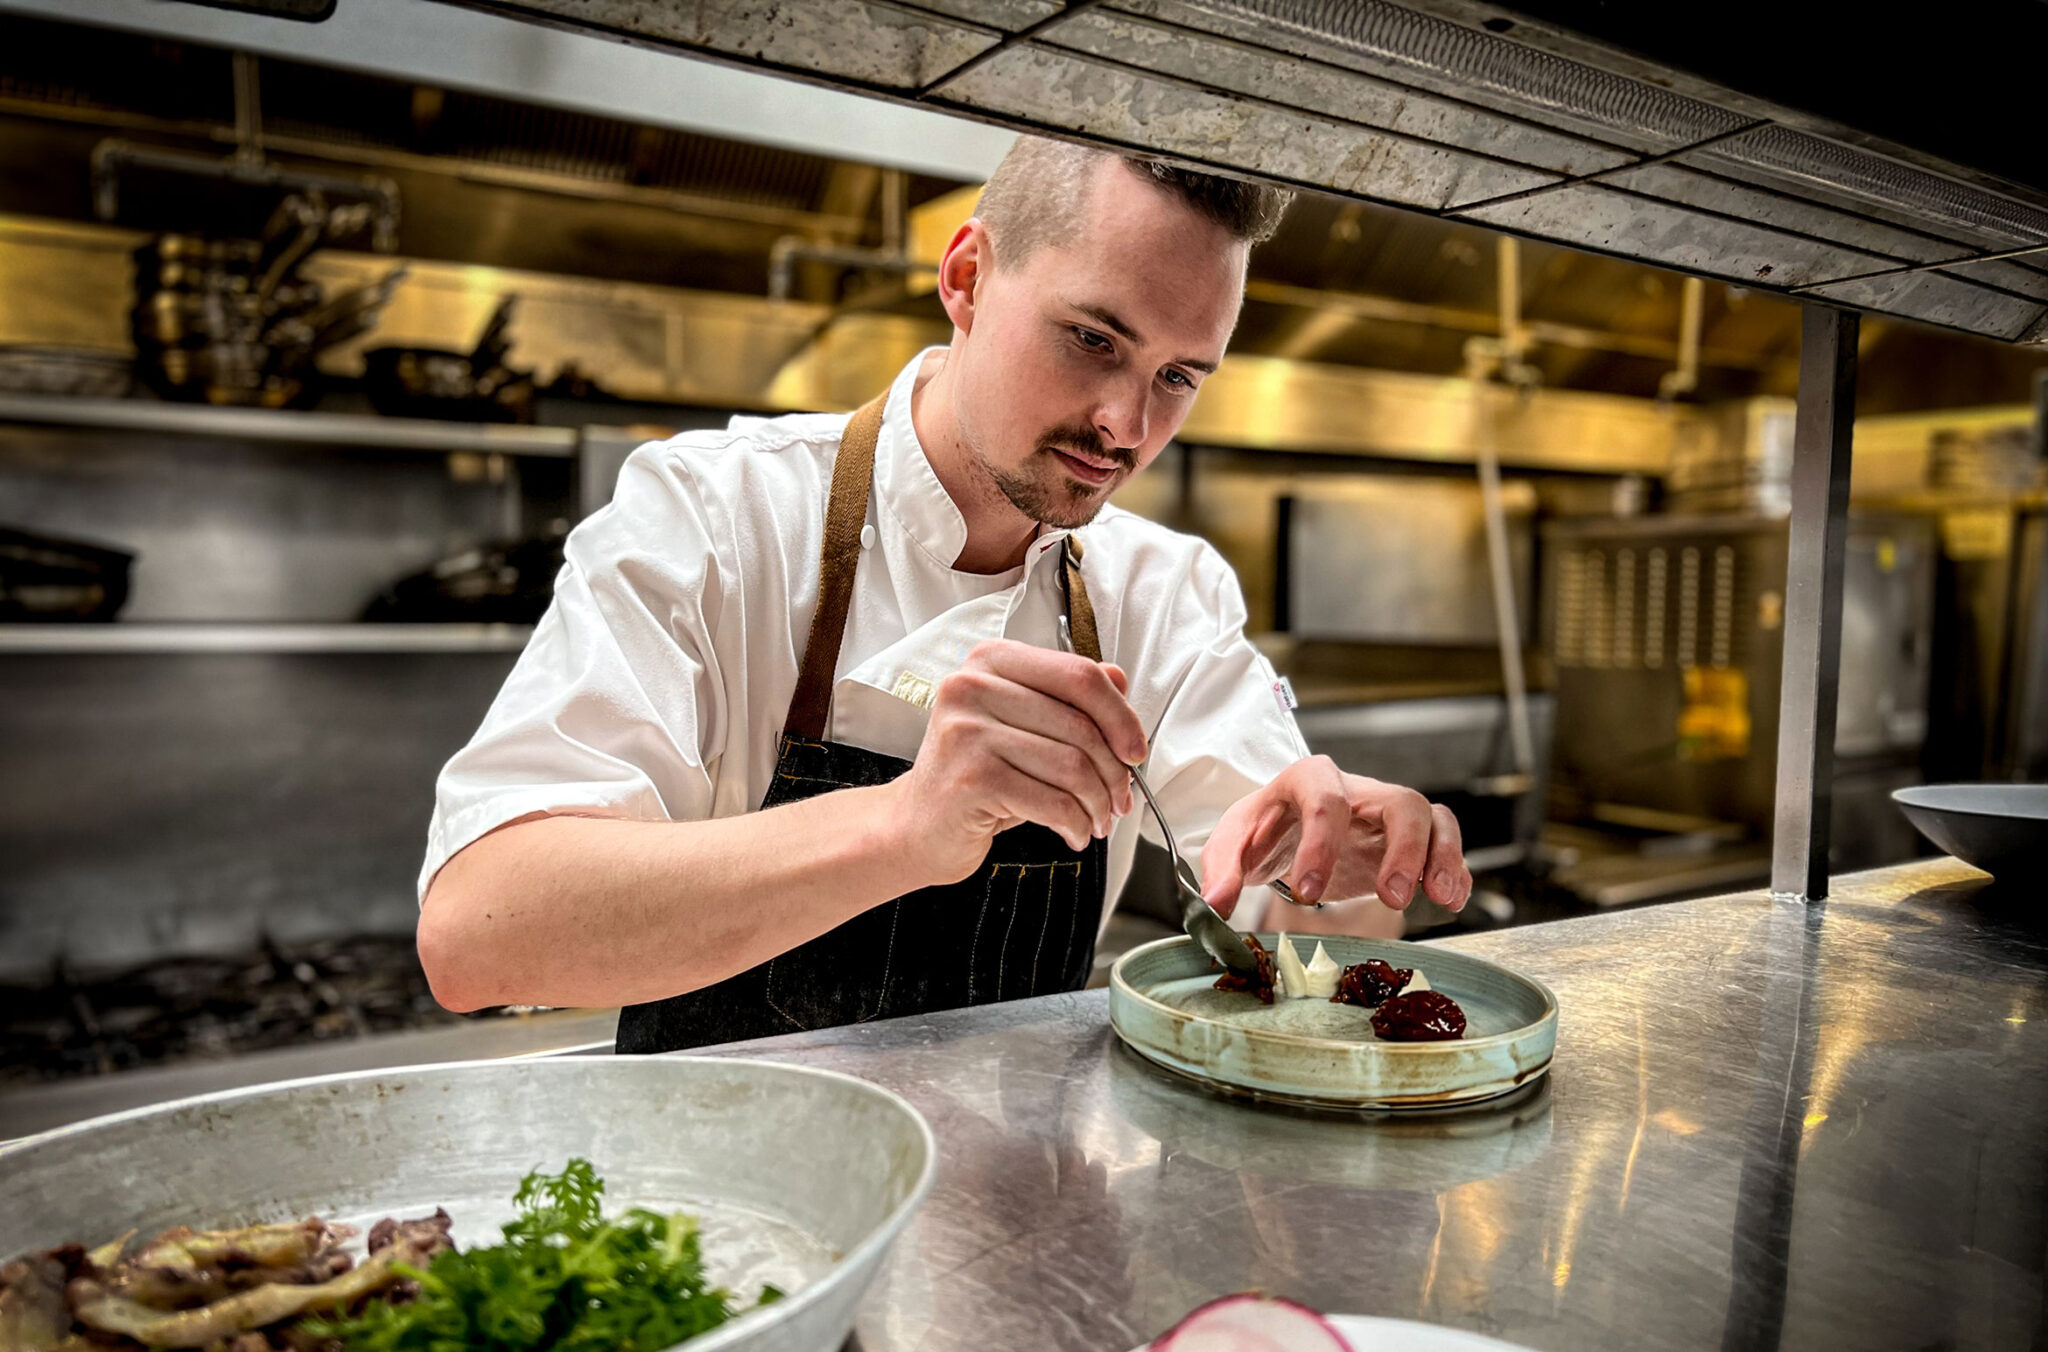 Chef Sean Thornhill adds the finishing touches to a dish in the kitchen of the Fairmont Chateau Whistler.